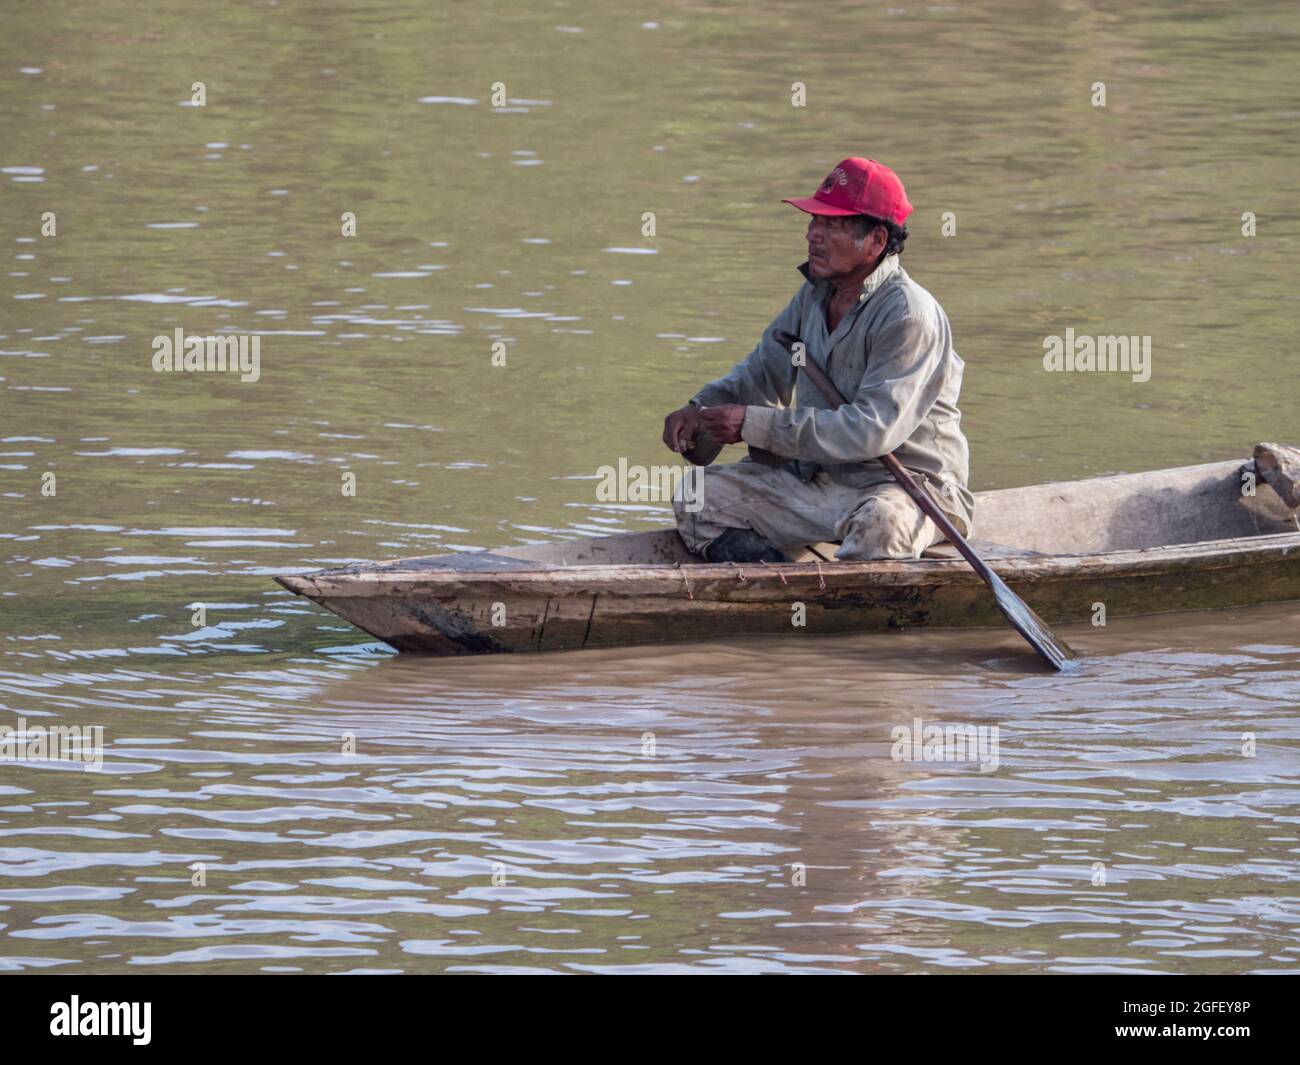 Village Pueblo, Peru- Sep 2017: Portrait of a man on a small wooden boat, a  local inhabitant of the Amazon rain forest. Amazonia. Latin America Stock  Photo - Alamy